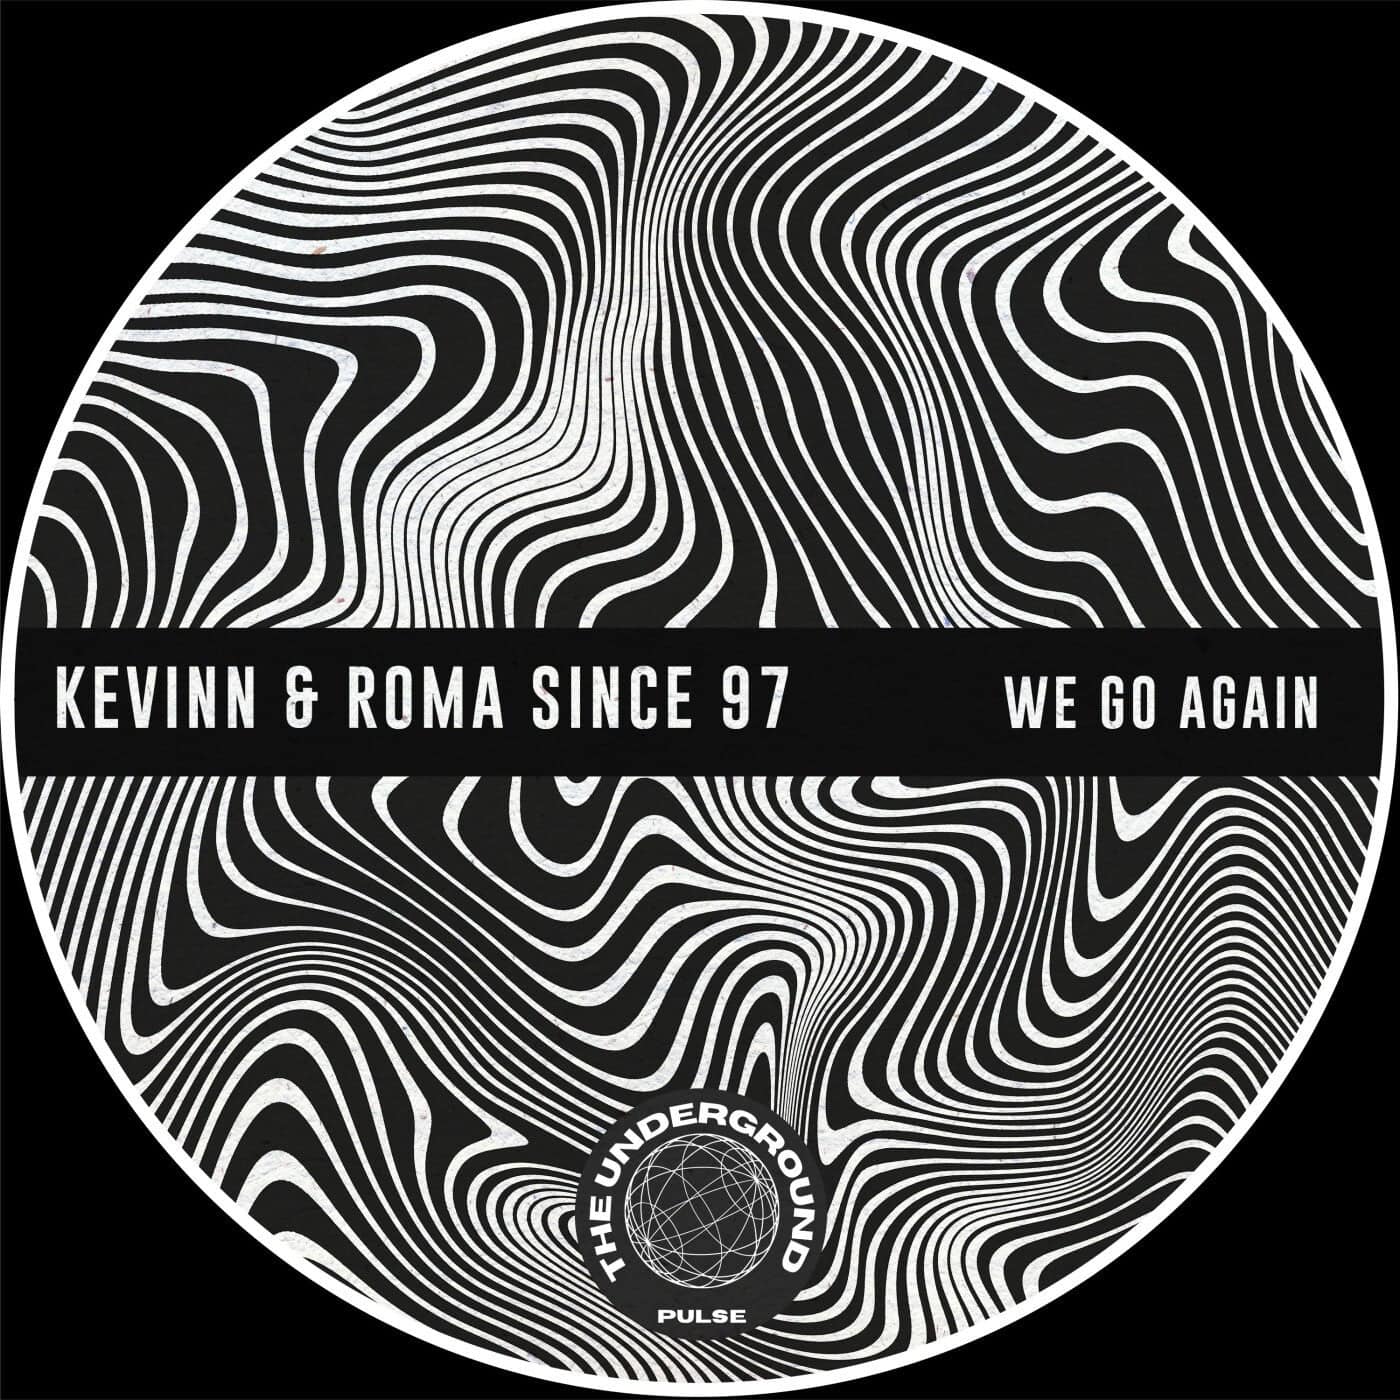 image cover: ROMA since 97, Kevinn - We Go Again / TUP004